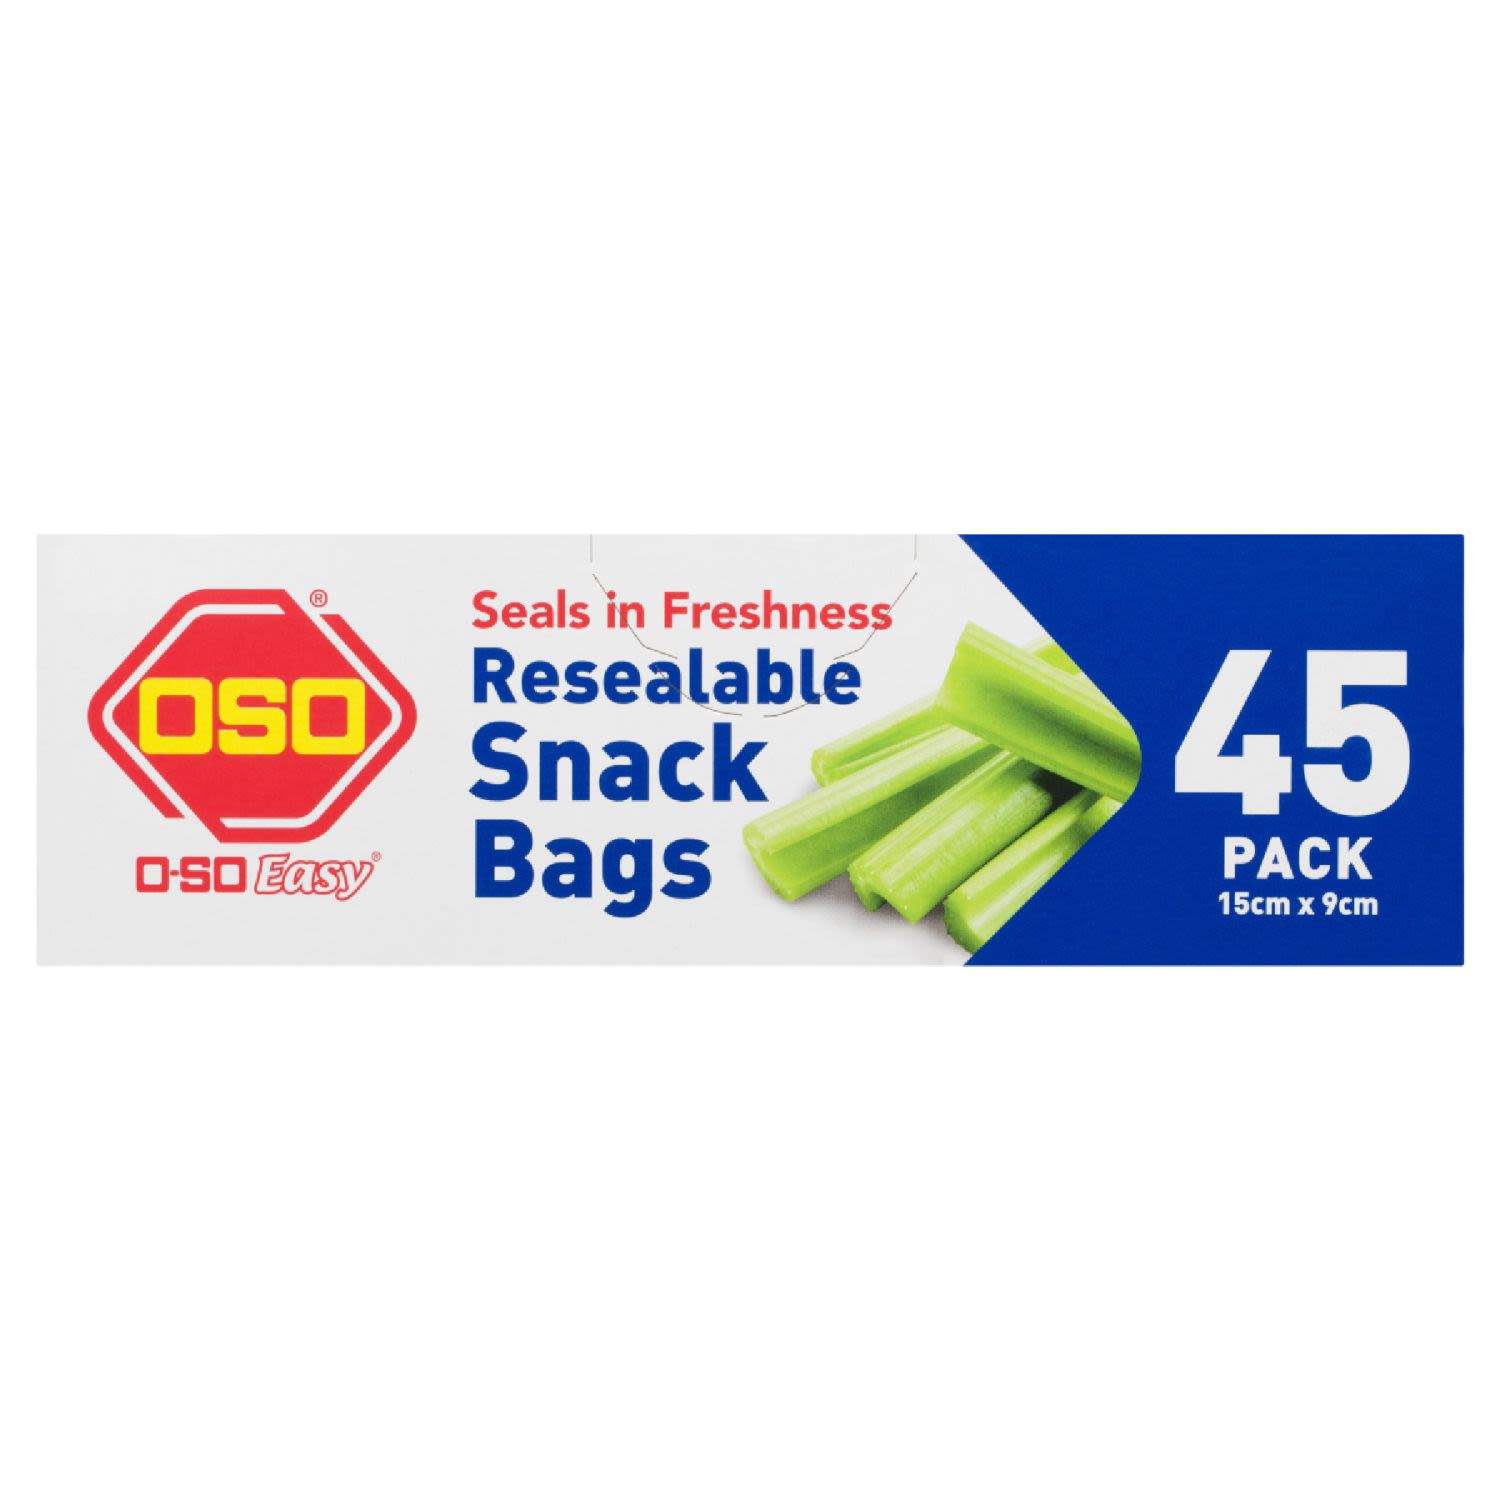 Oso Easy Resealable Snack Bags, 45 Each